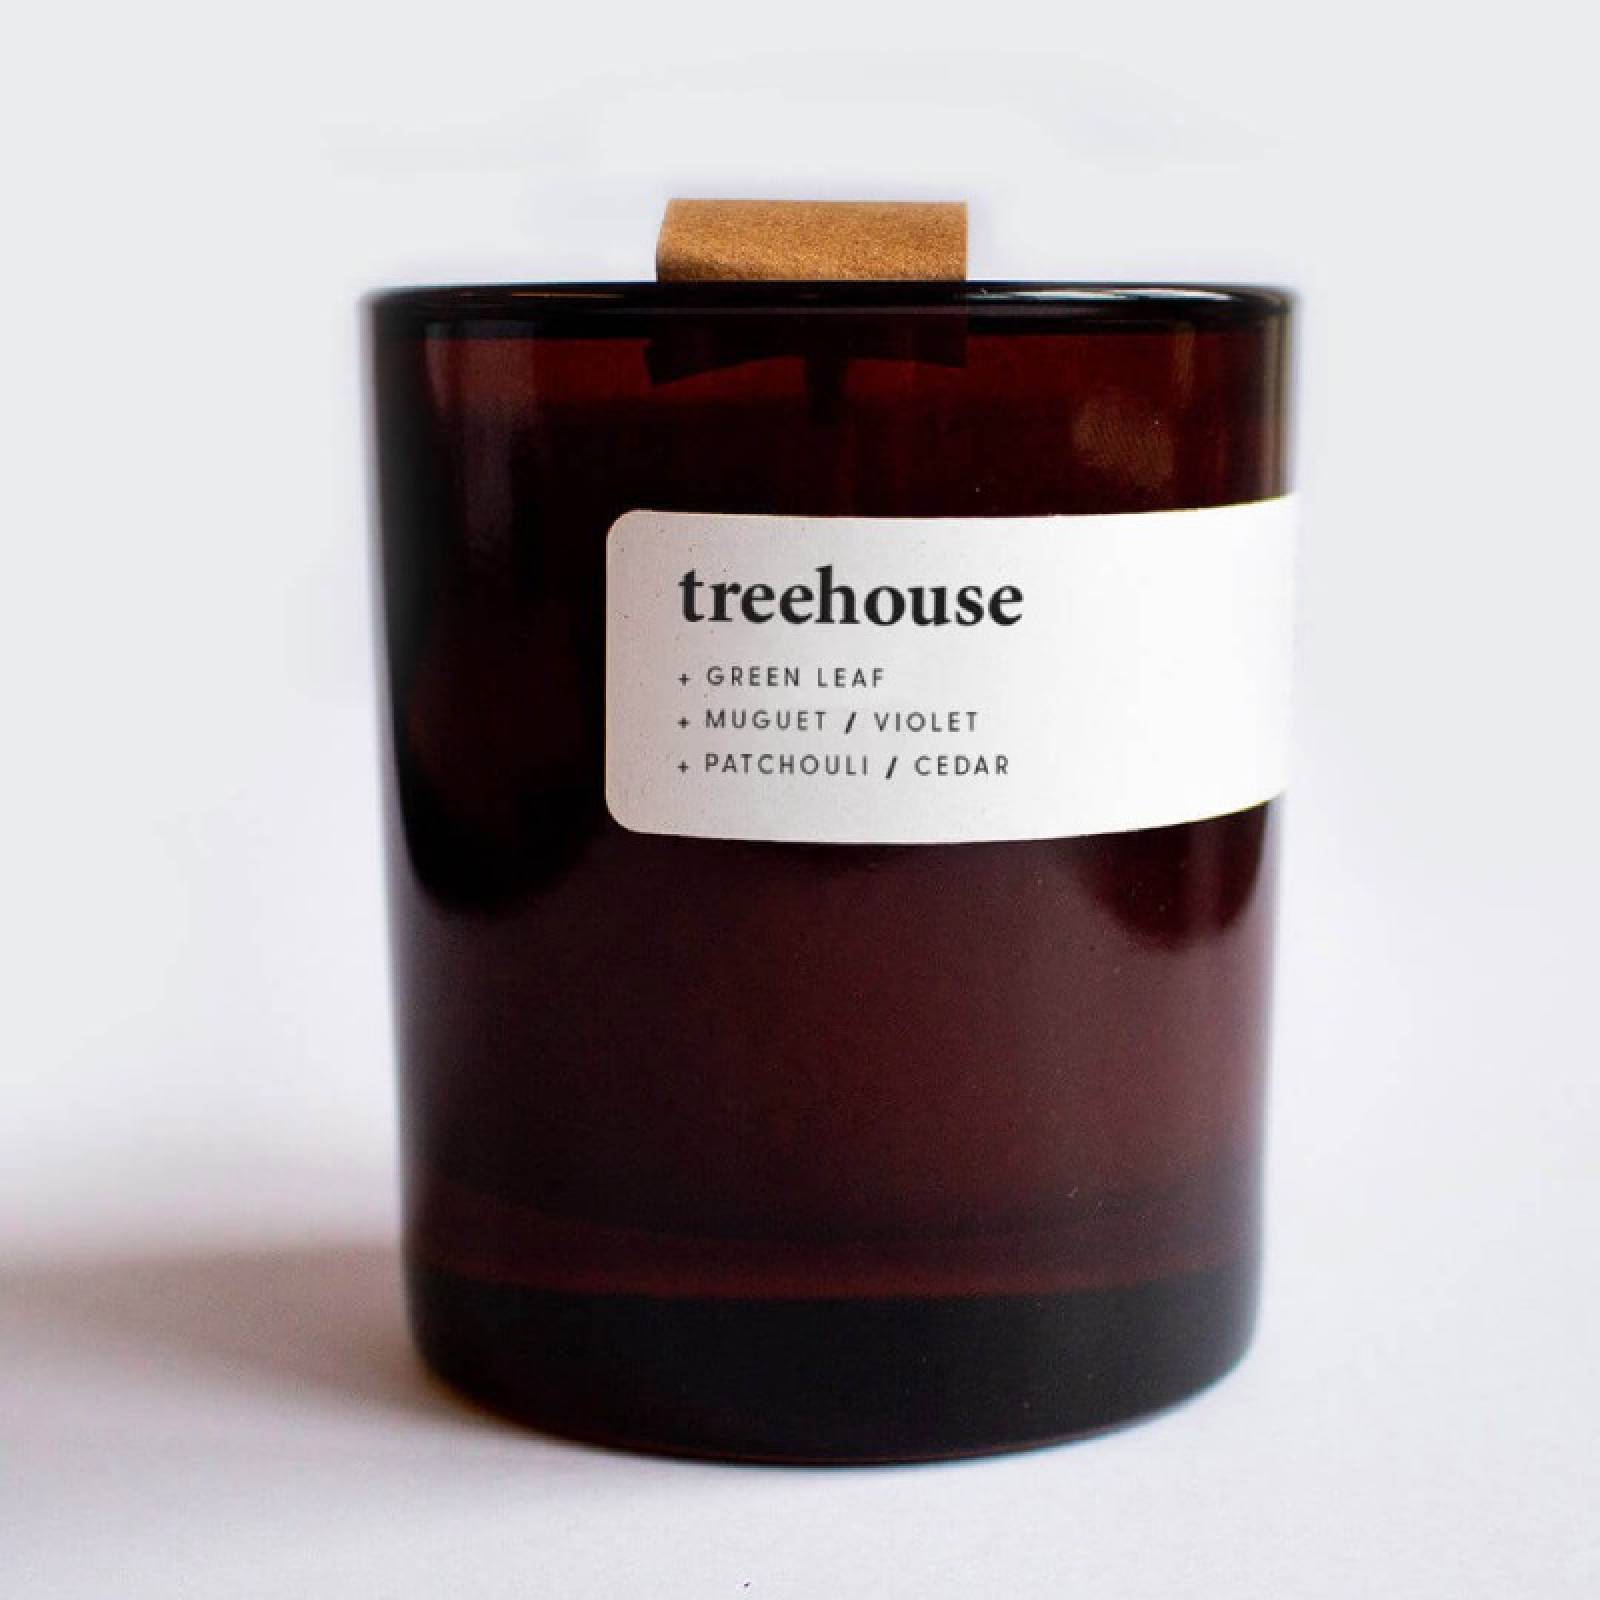 Treehouse - Candle In Amber Glass Jar 200g